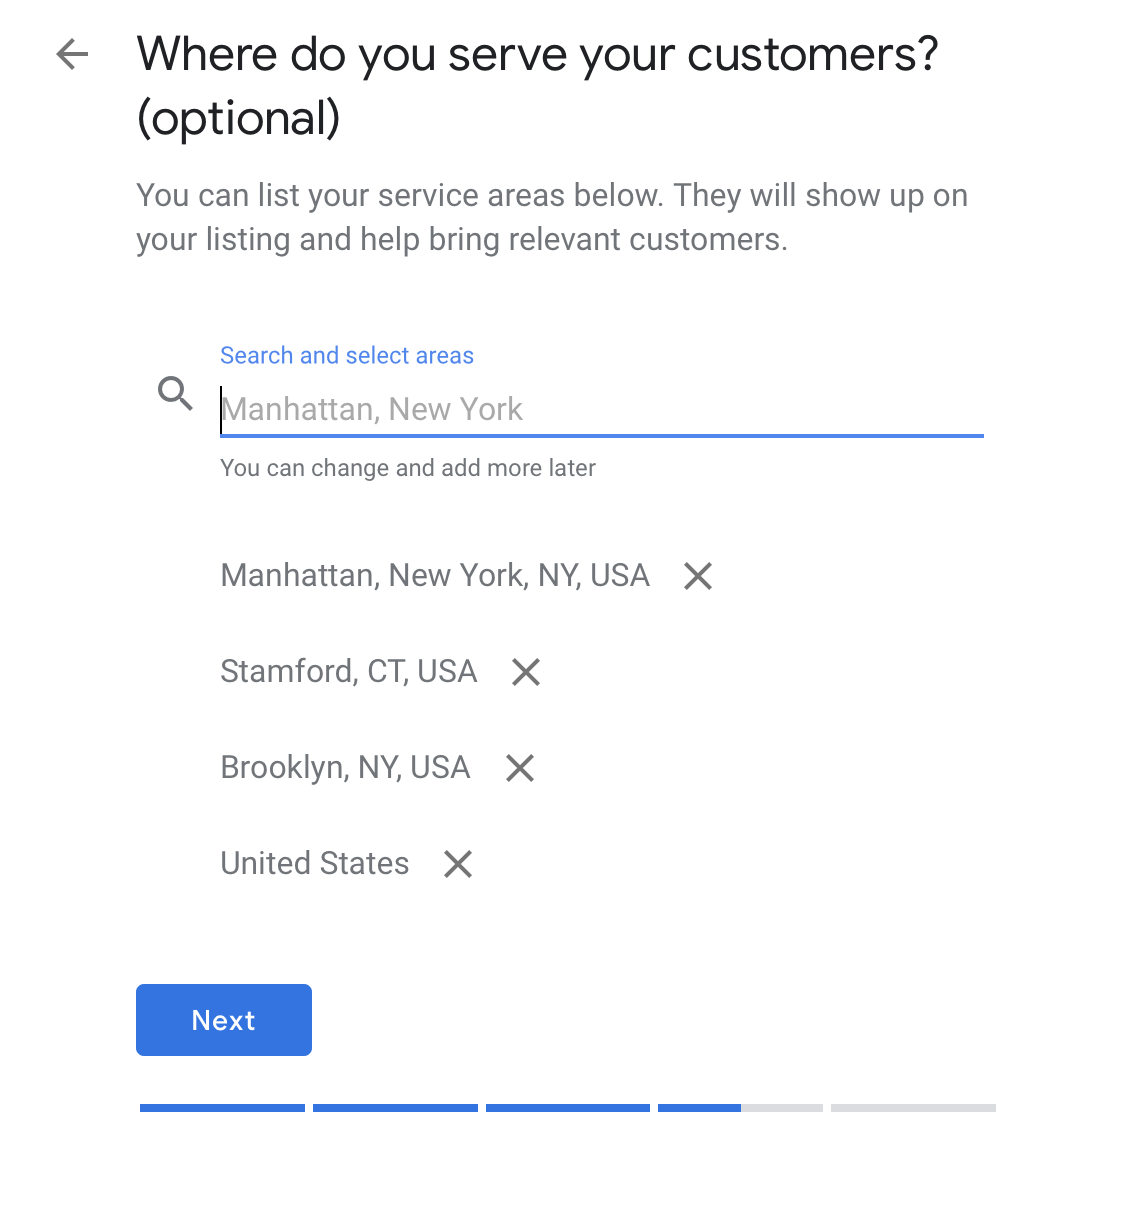 Google Business Profile screenshot showing a search bar and 3 service areas selected